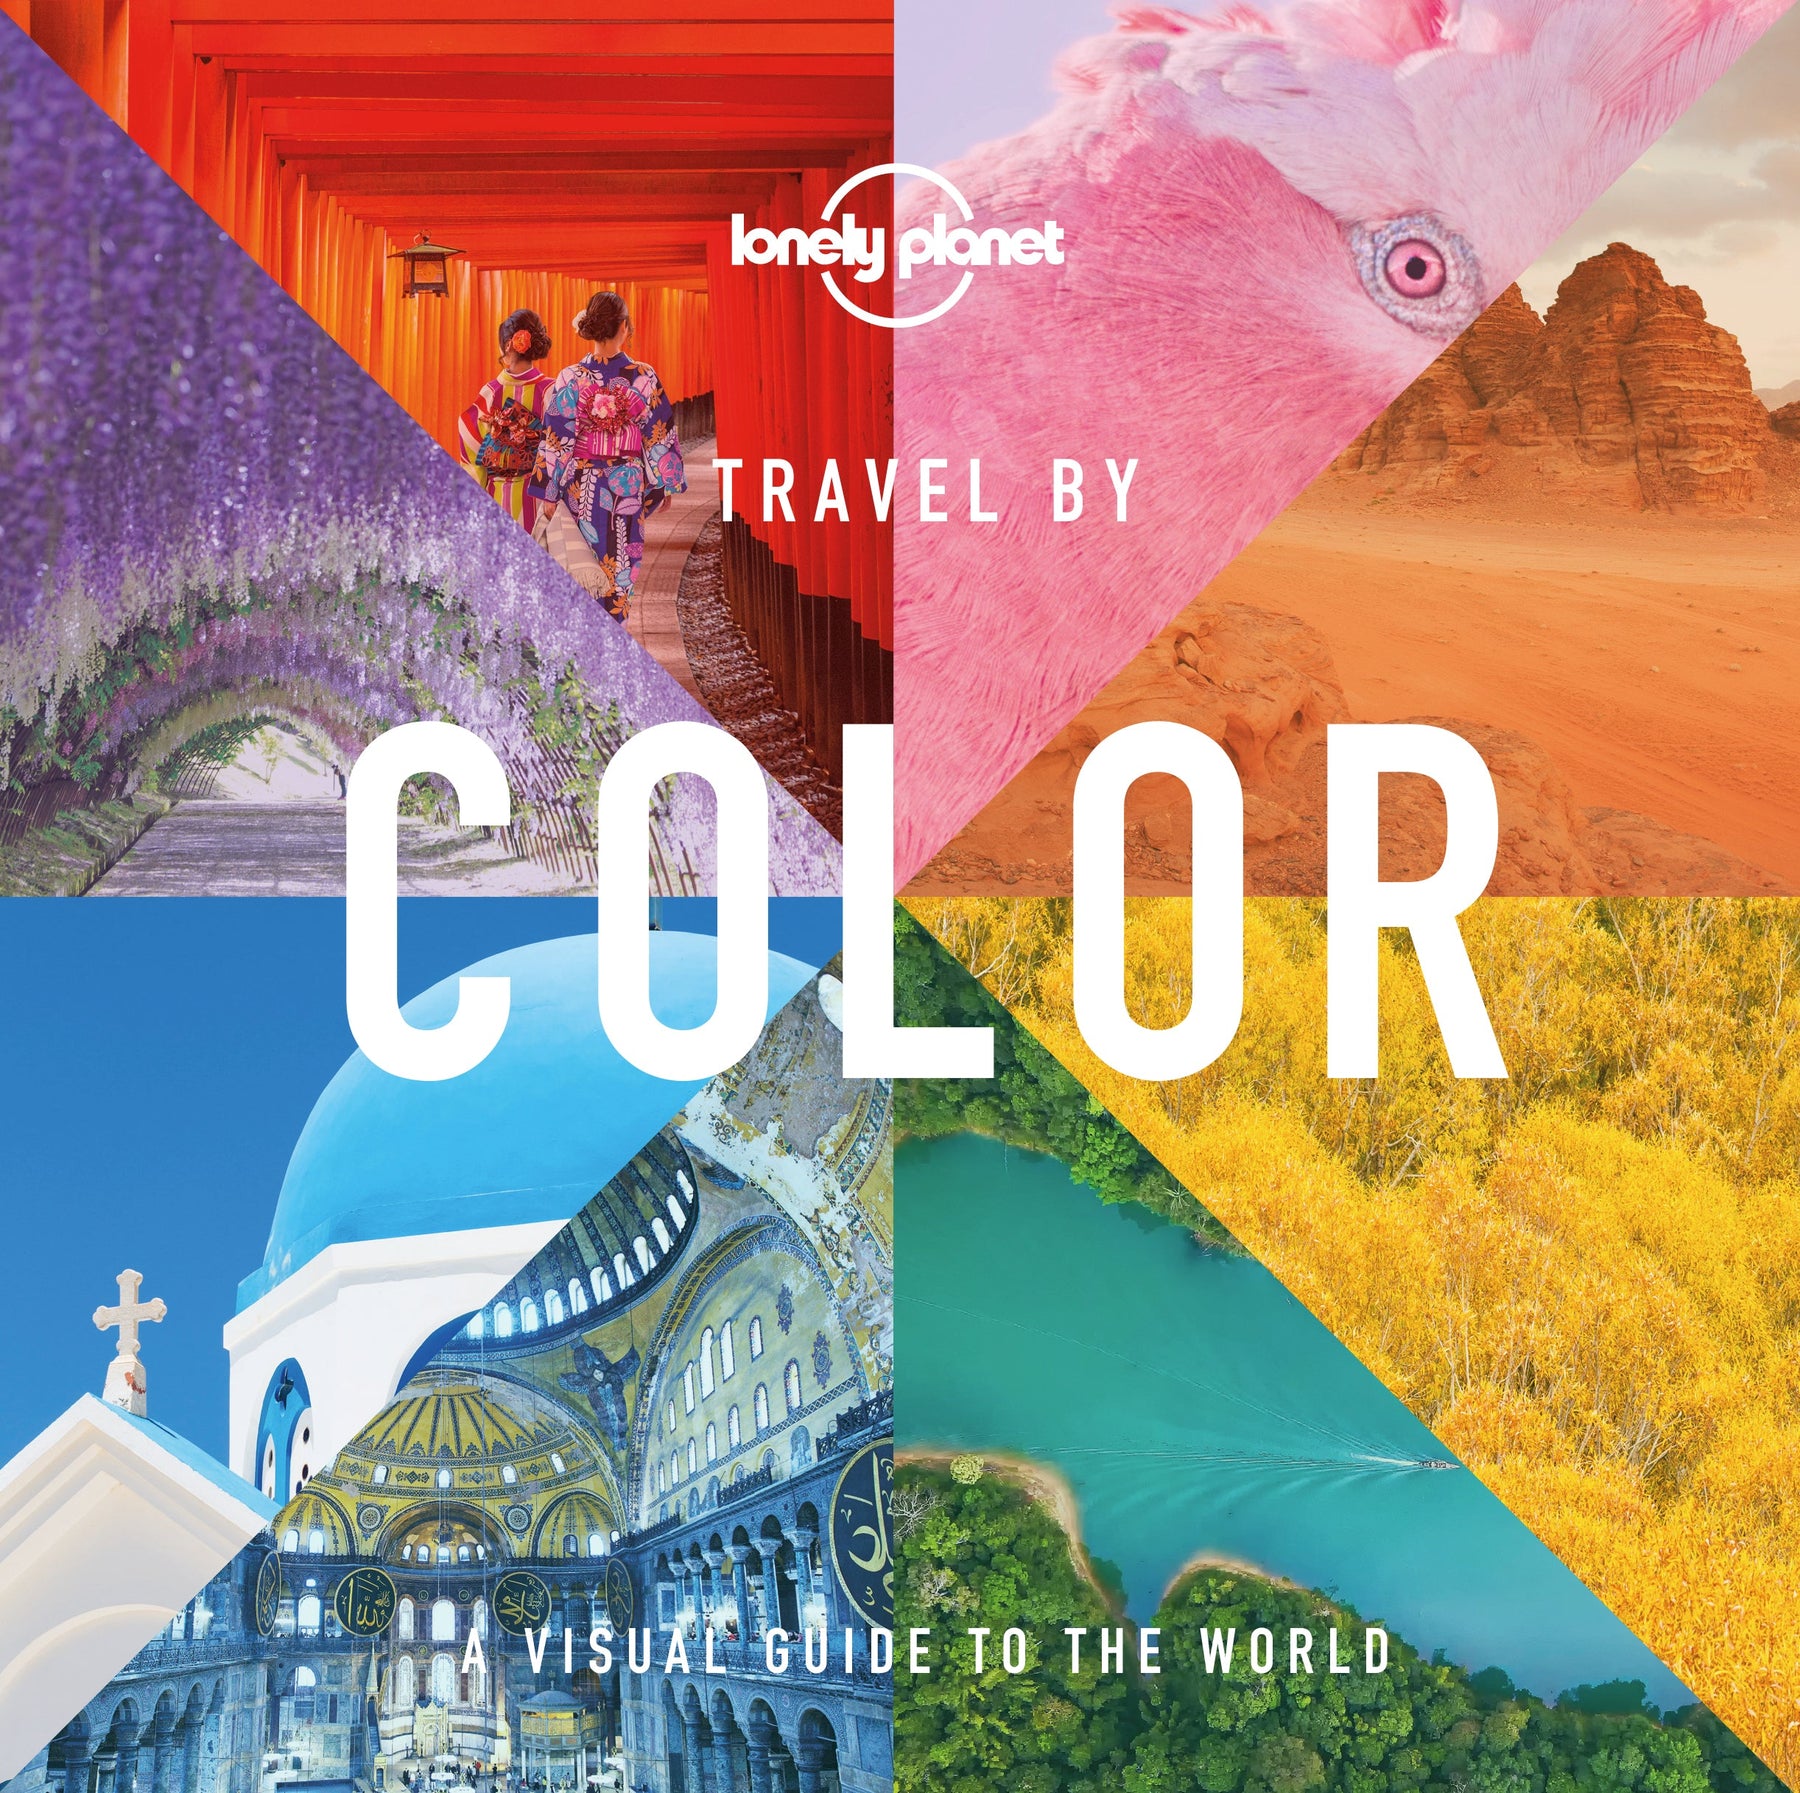 Travel by Color